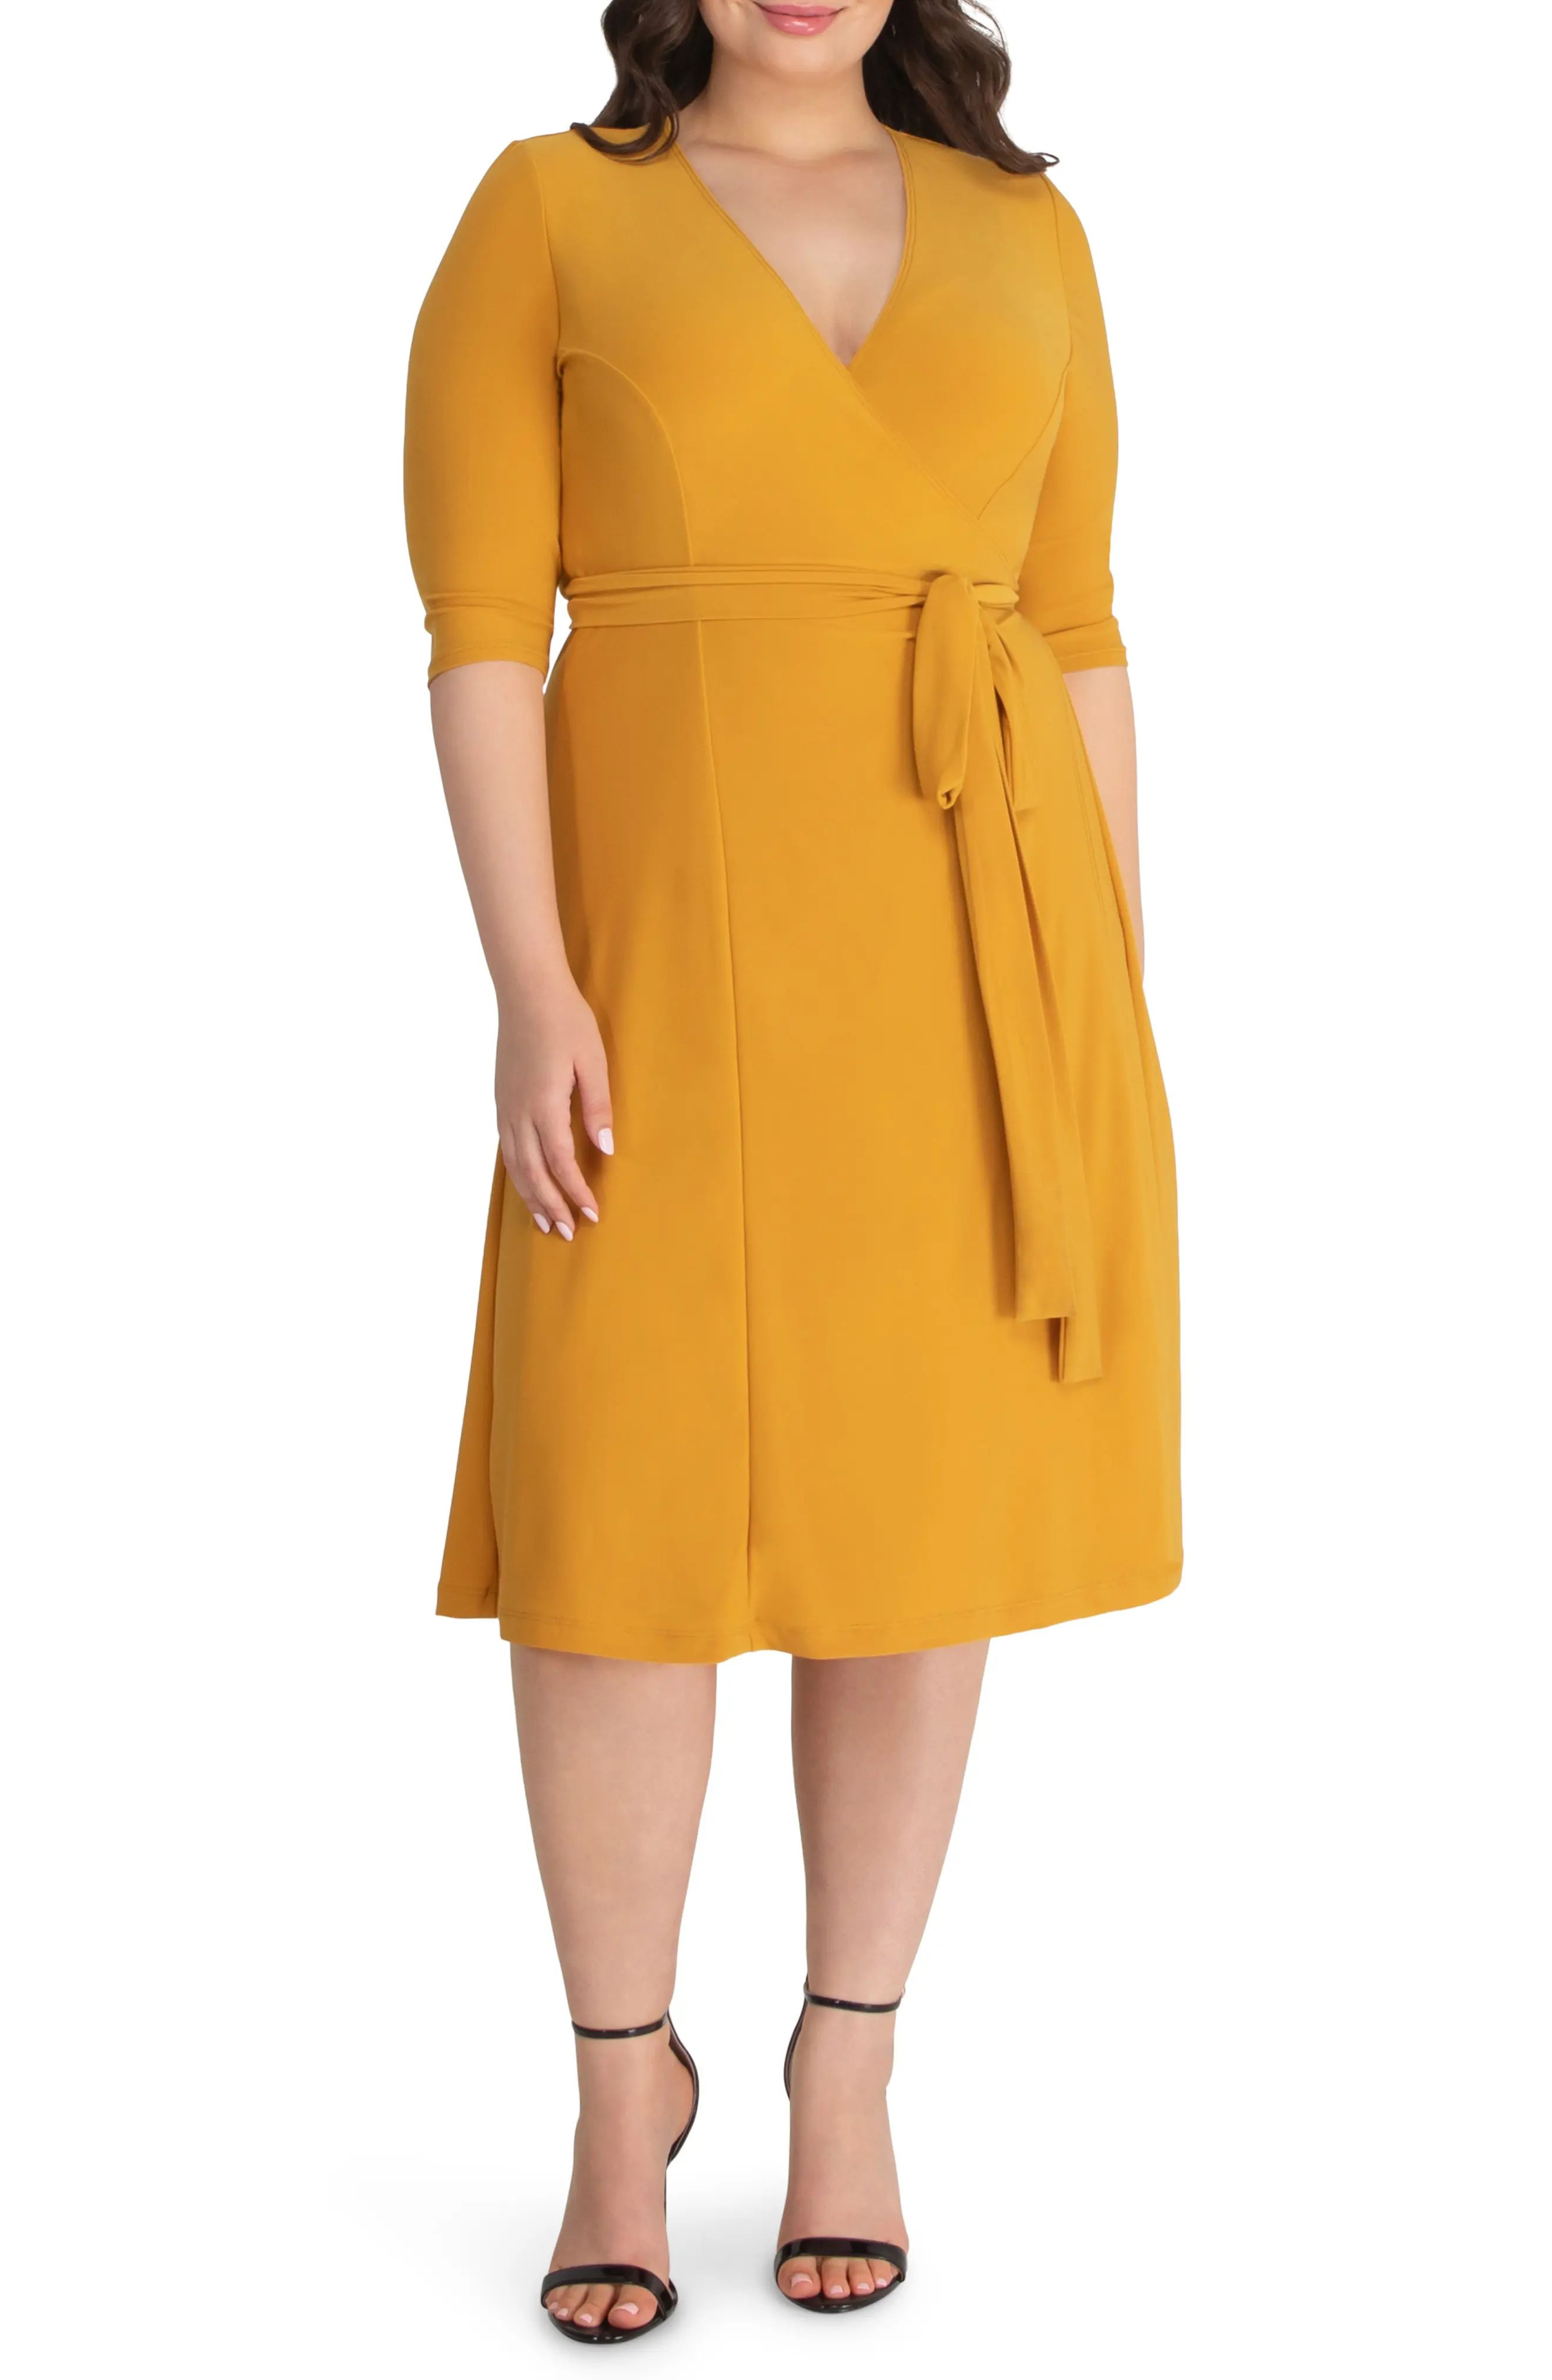 Kiyonna Essential Wrap Dress, Size 2X in Tuscan Sun at Nordstrom | Nordstrom